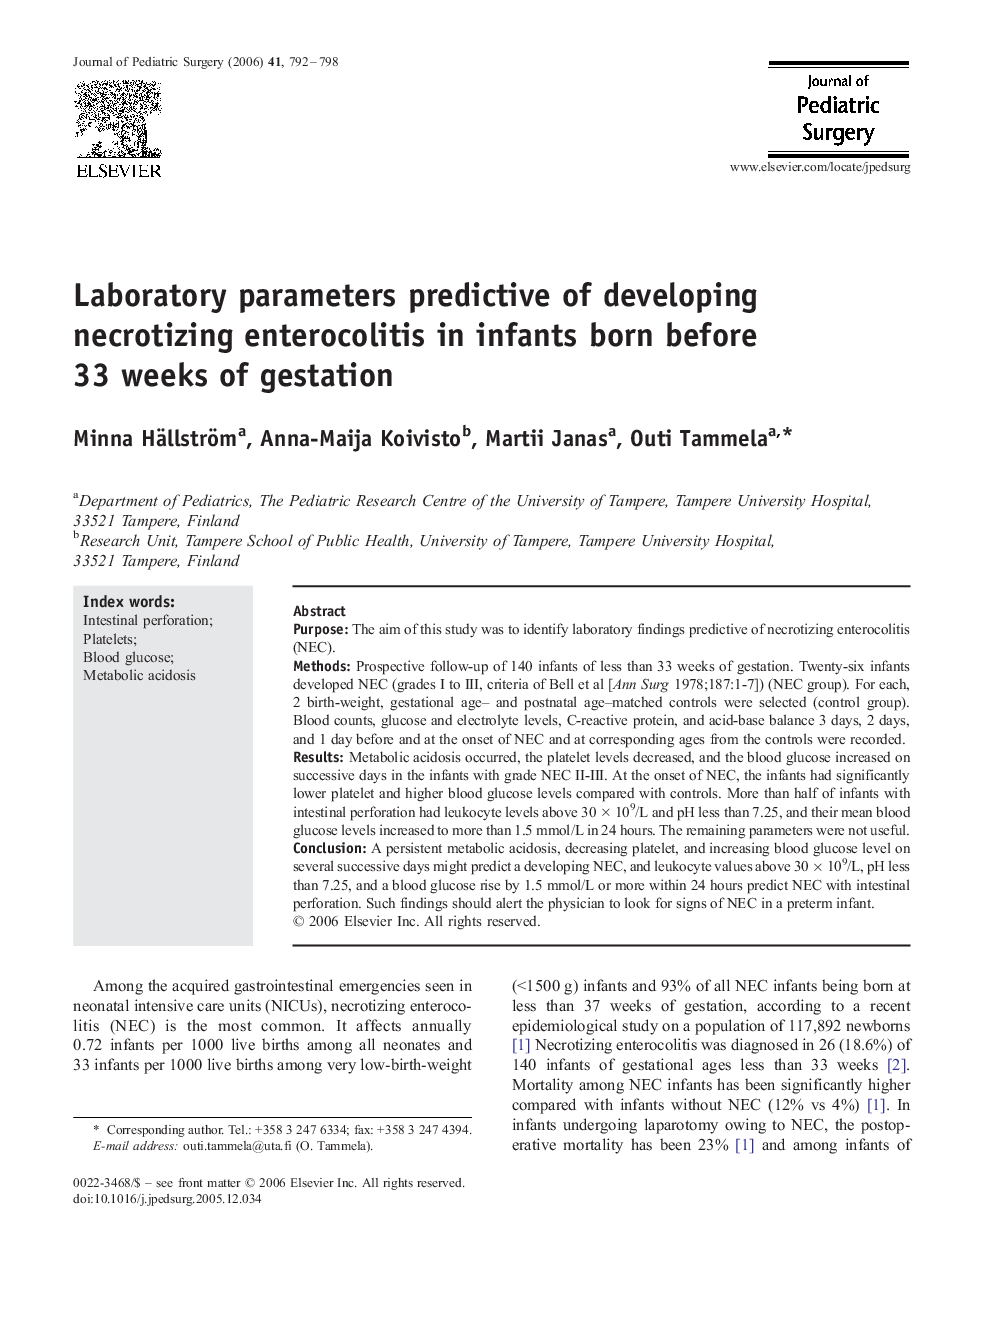 Laboratory parameters predictive of developing necrotizing enterocolitis in infants born before 33 weeks of gestation